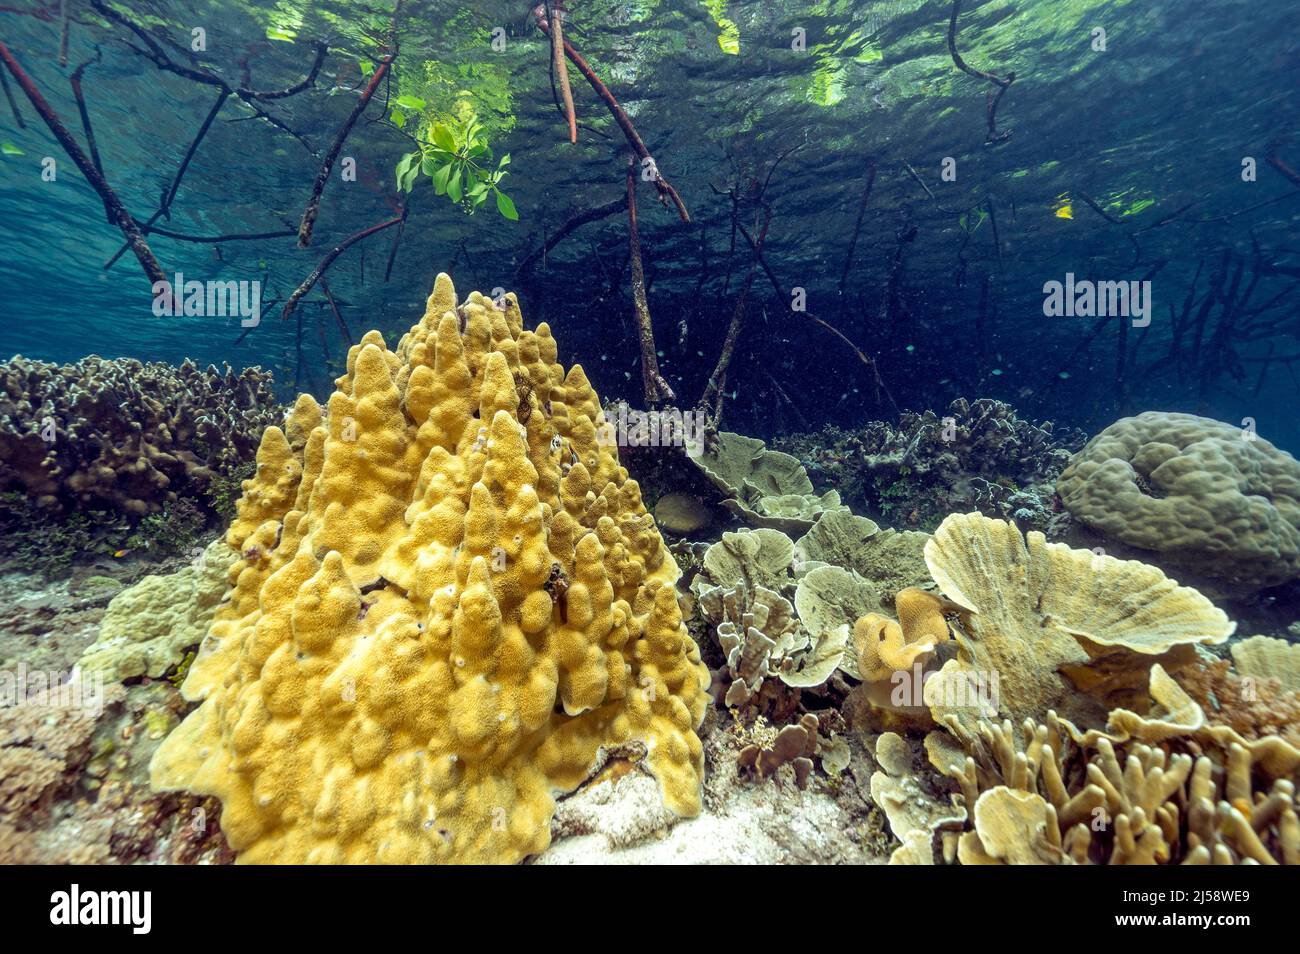 Reef scenic with hard corals under mangrove forest, Raja Ampat Indonesia. Stock Photo